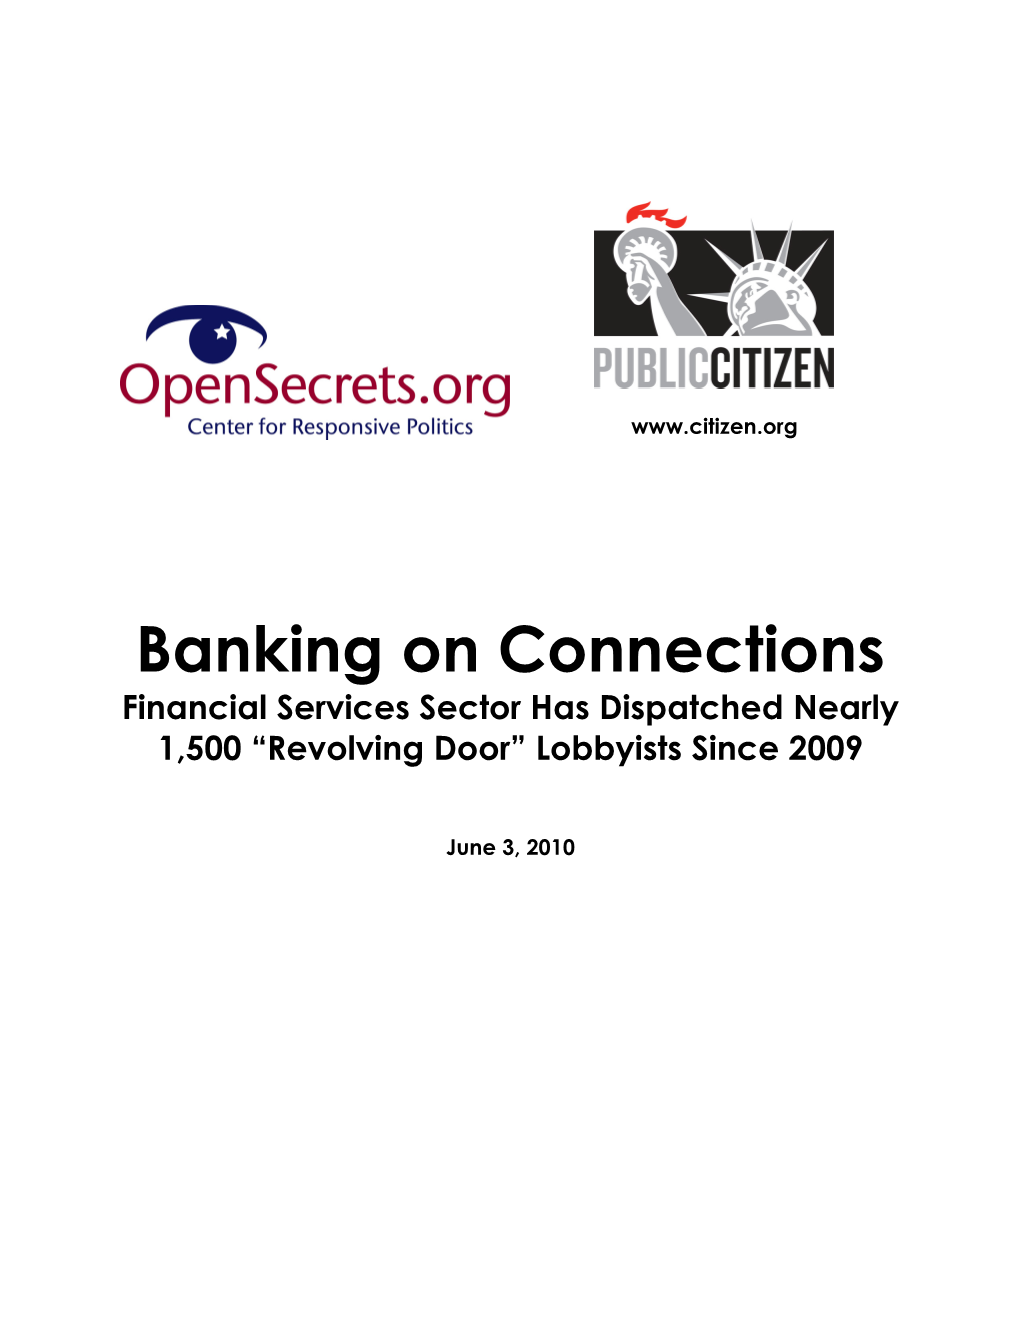 Banking on Connections Financial Services Sector Has Dispatched Nearly 1,500 “Revolving Door” Lobbyists Since 2009